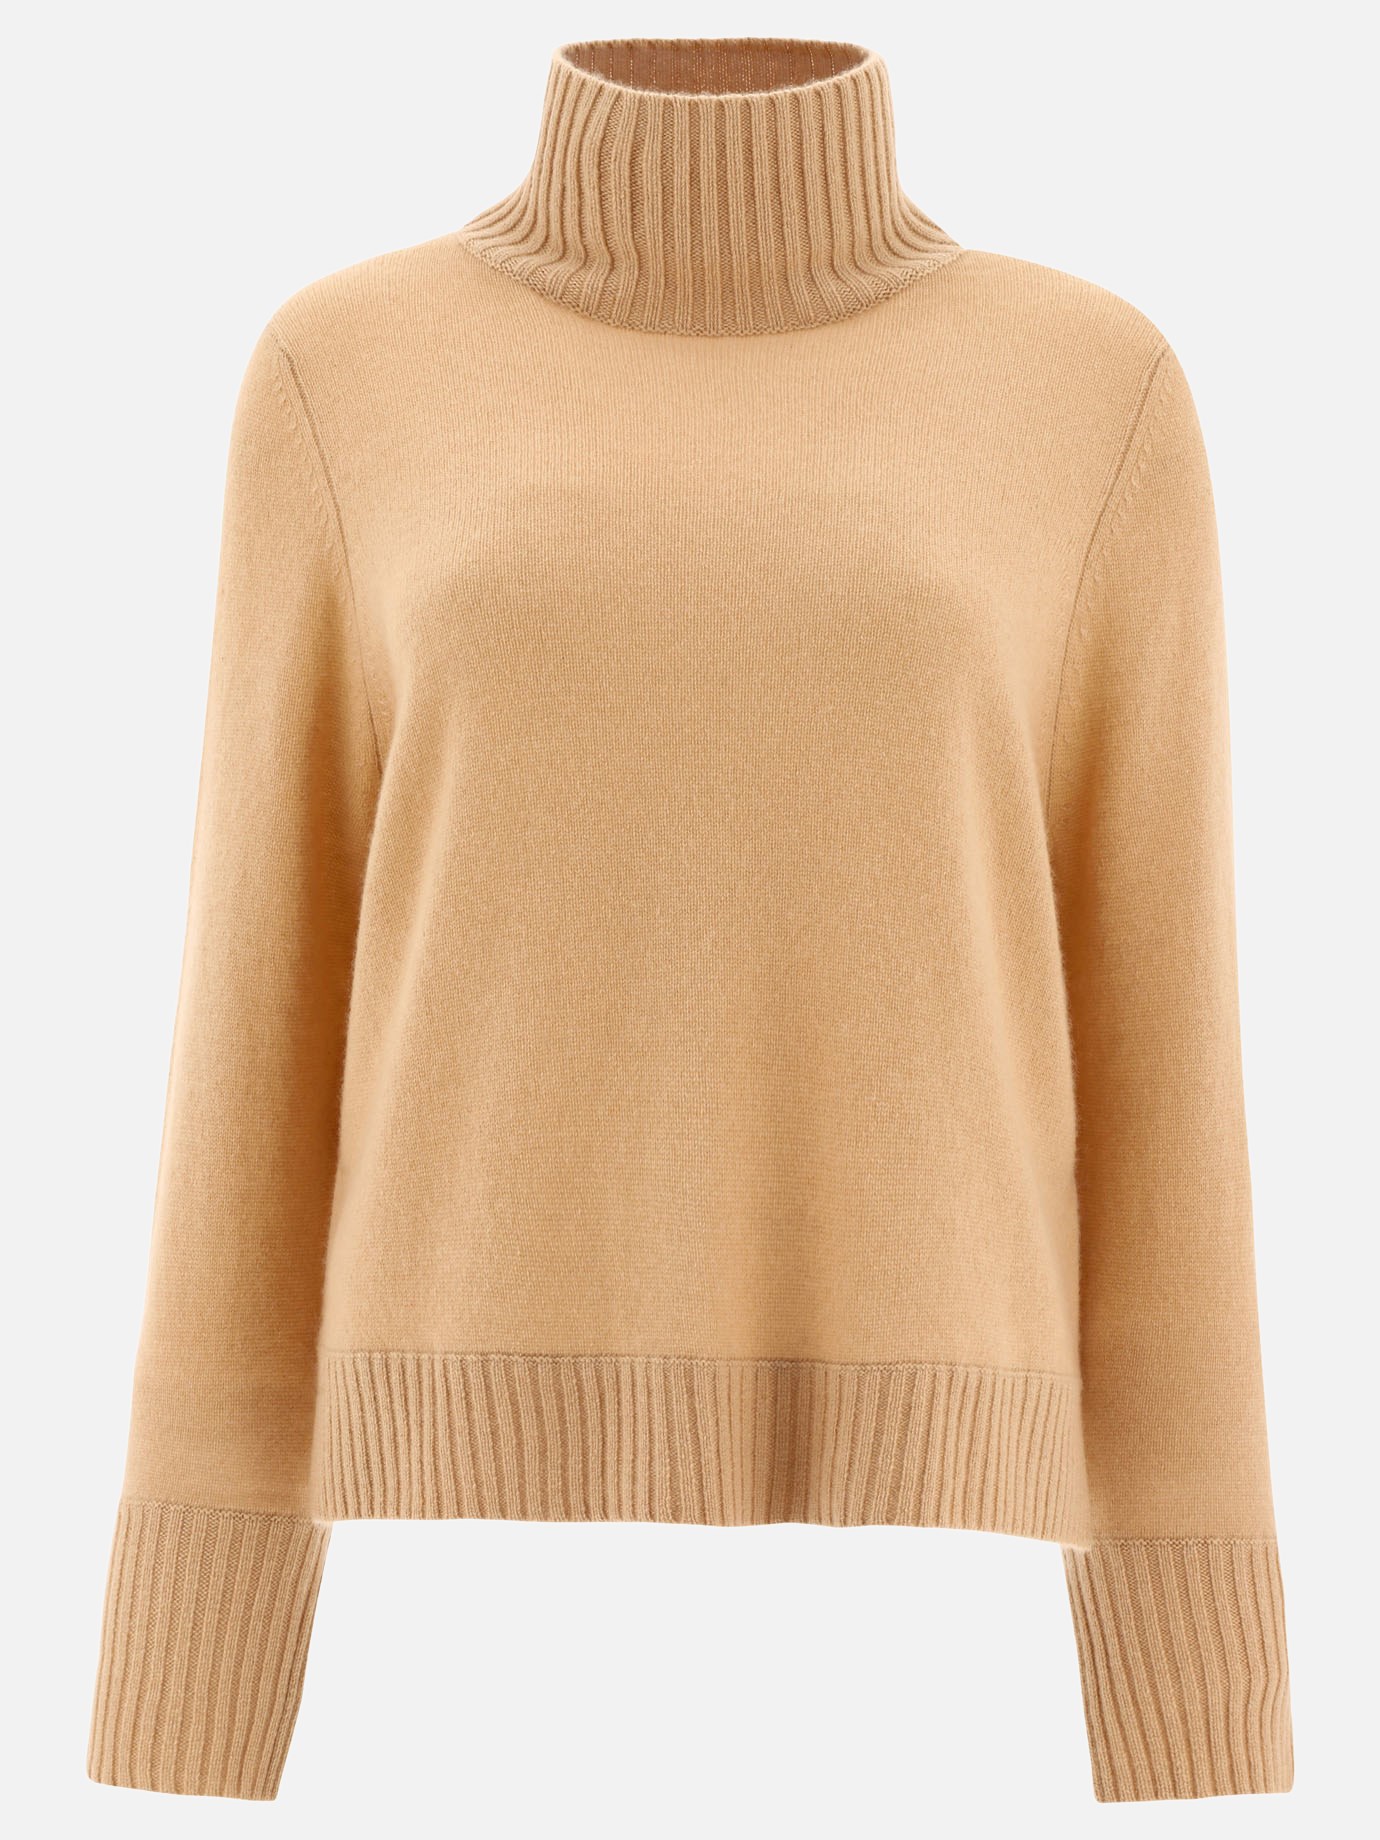 Ribbed turtleneckby Allude - 5